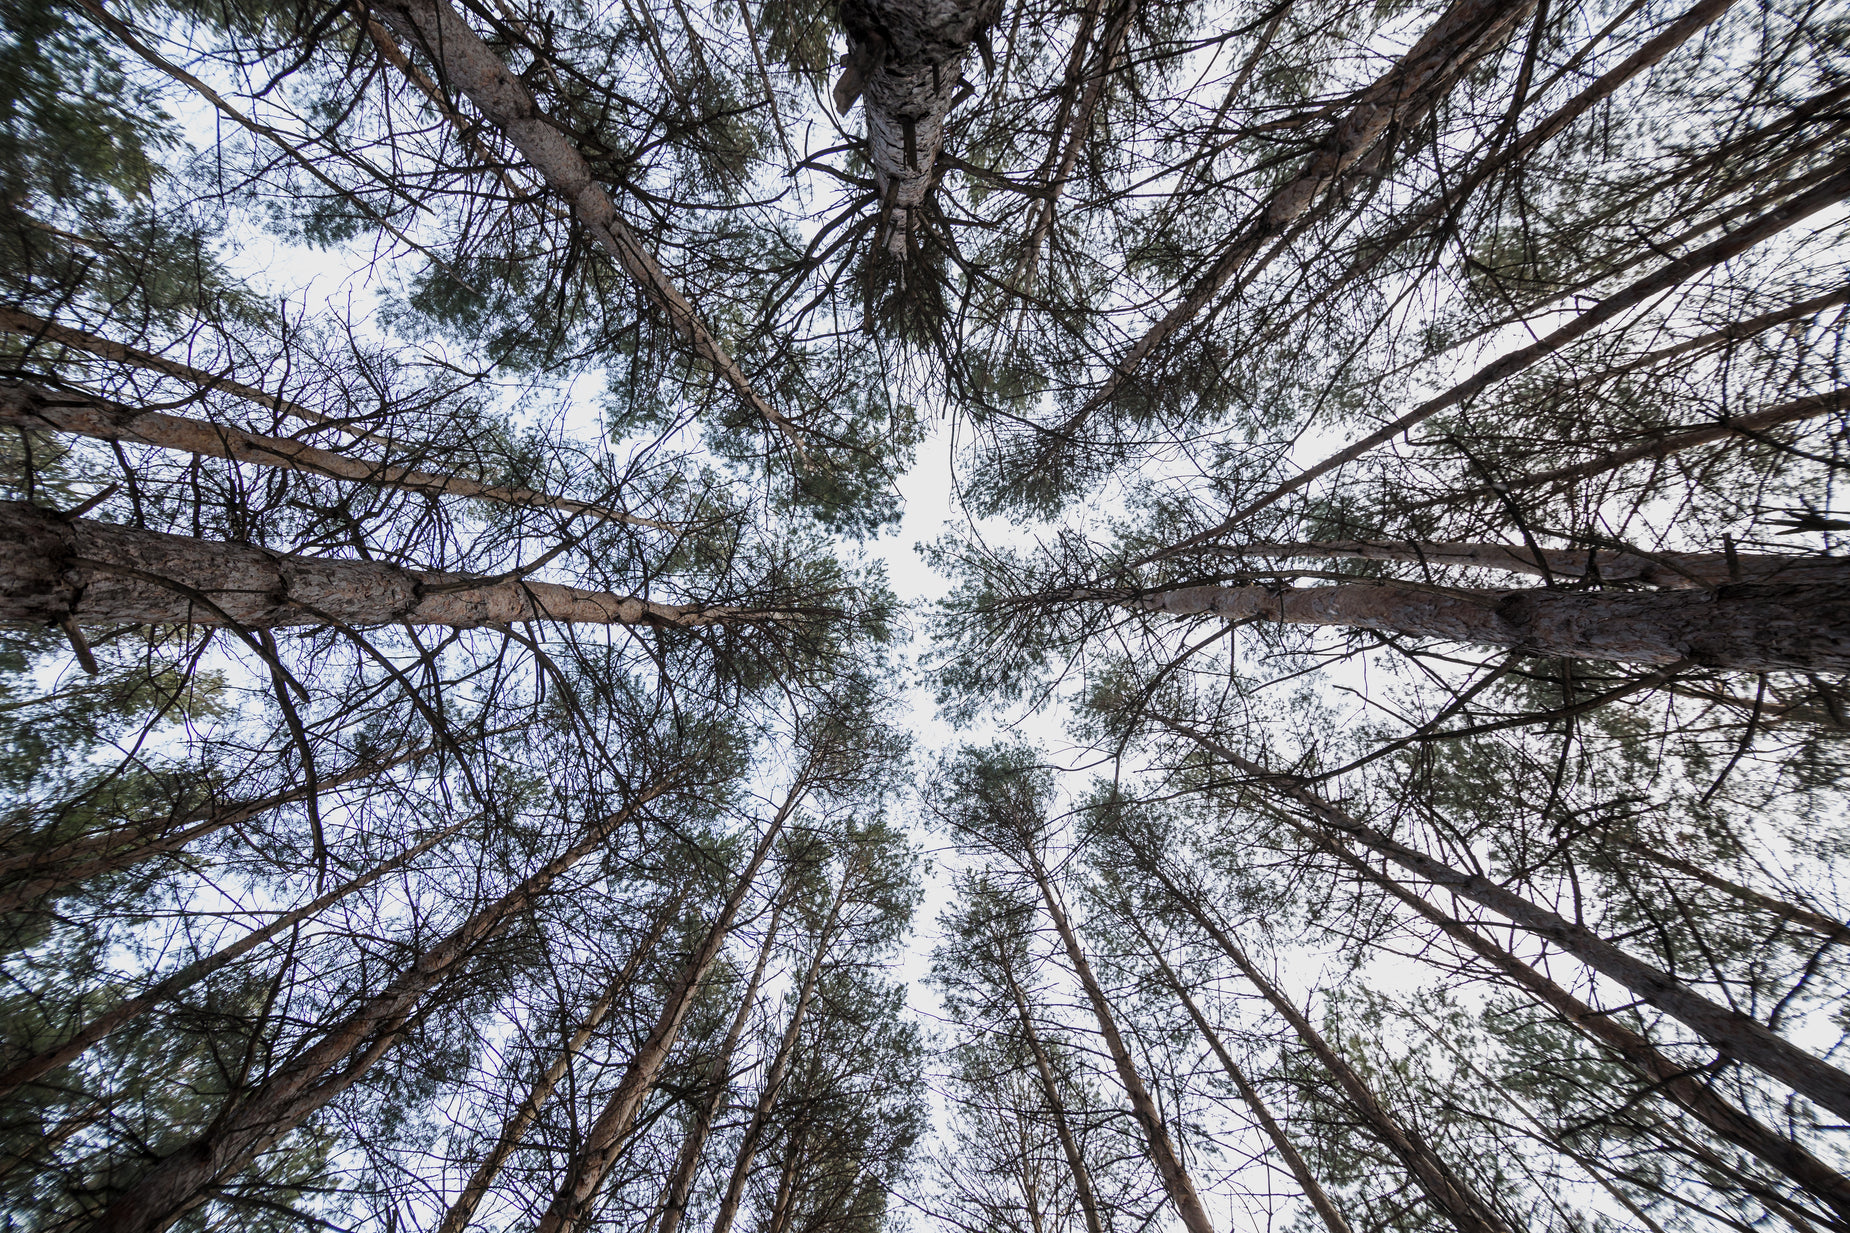 the top view from below, looking up at some trees